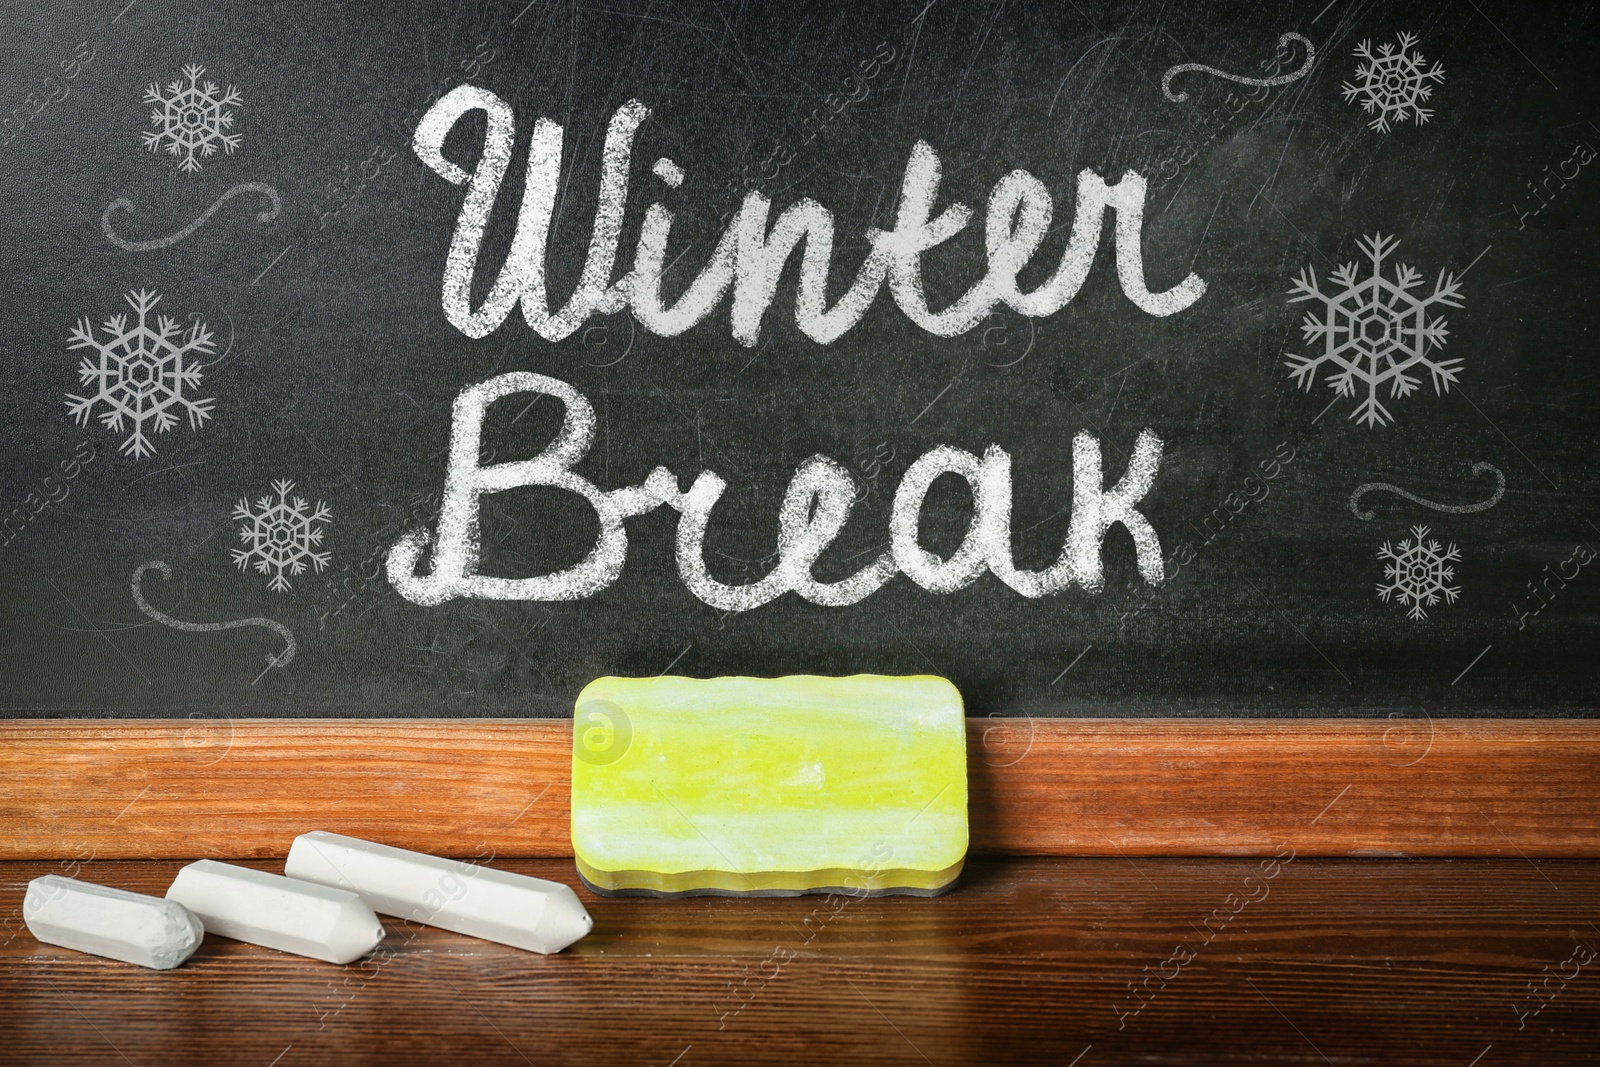 Image of Text Winter break and snowflakes on school blackboard near table with chalk and duster